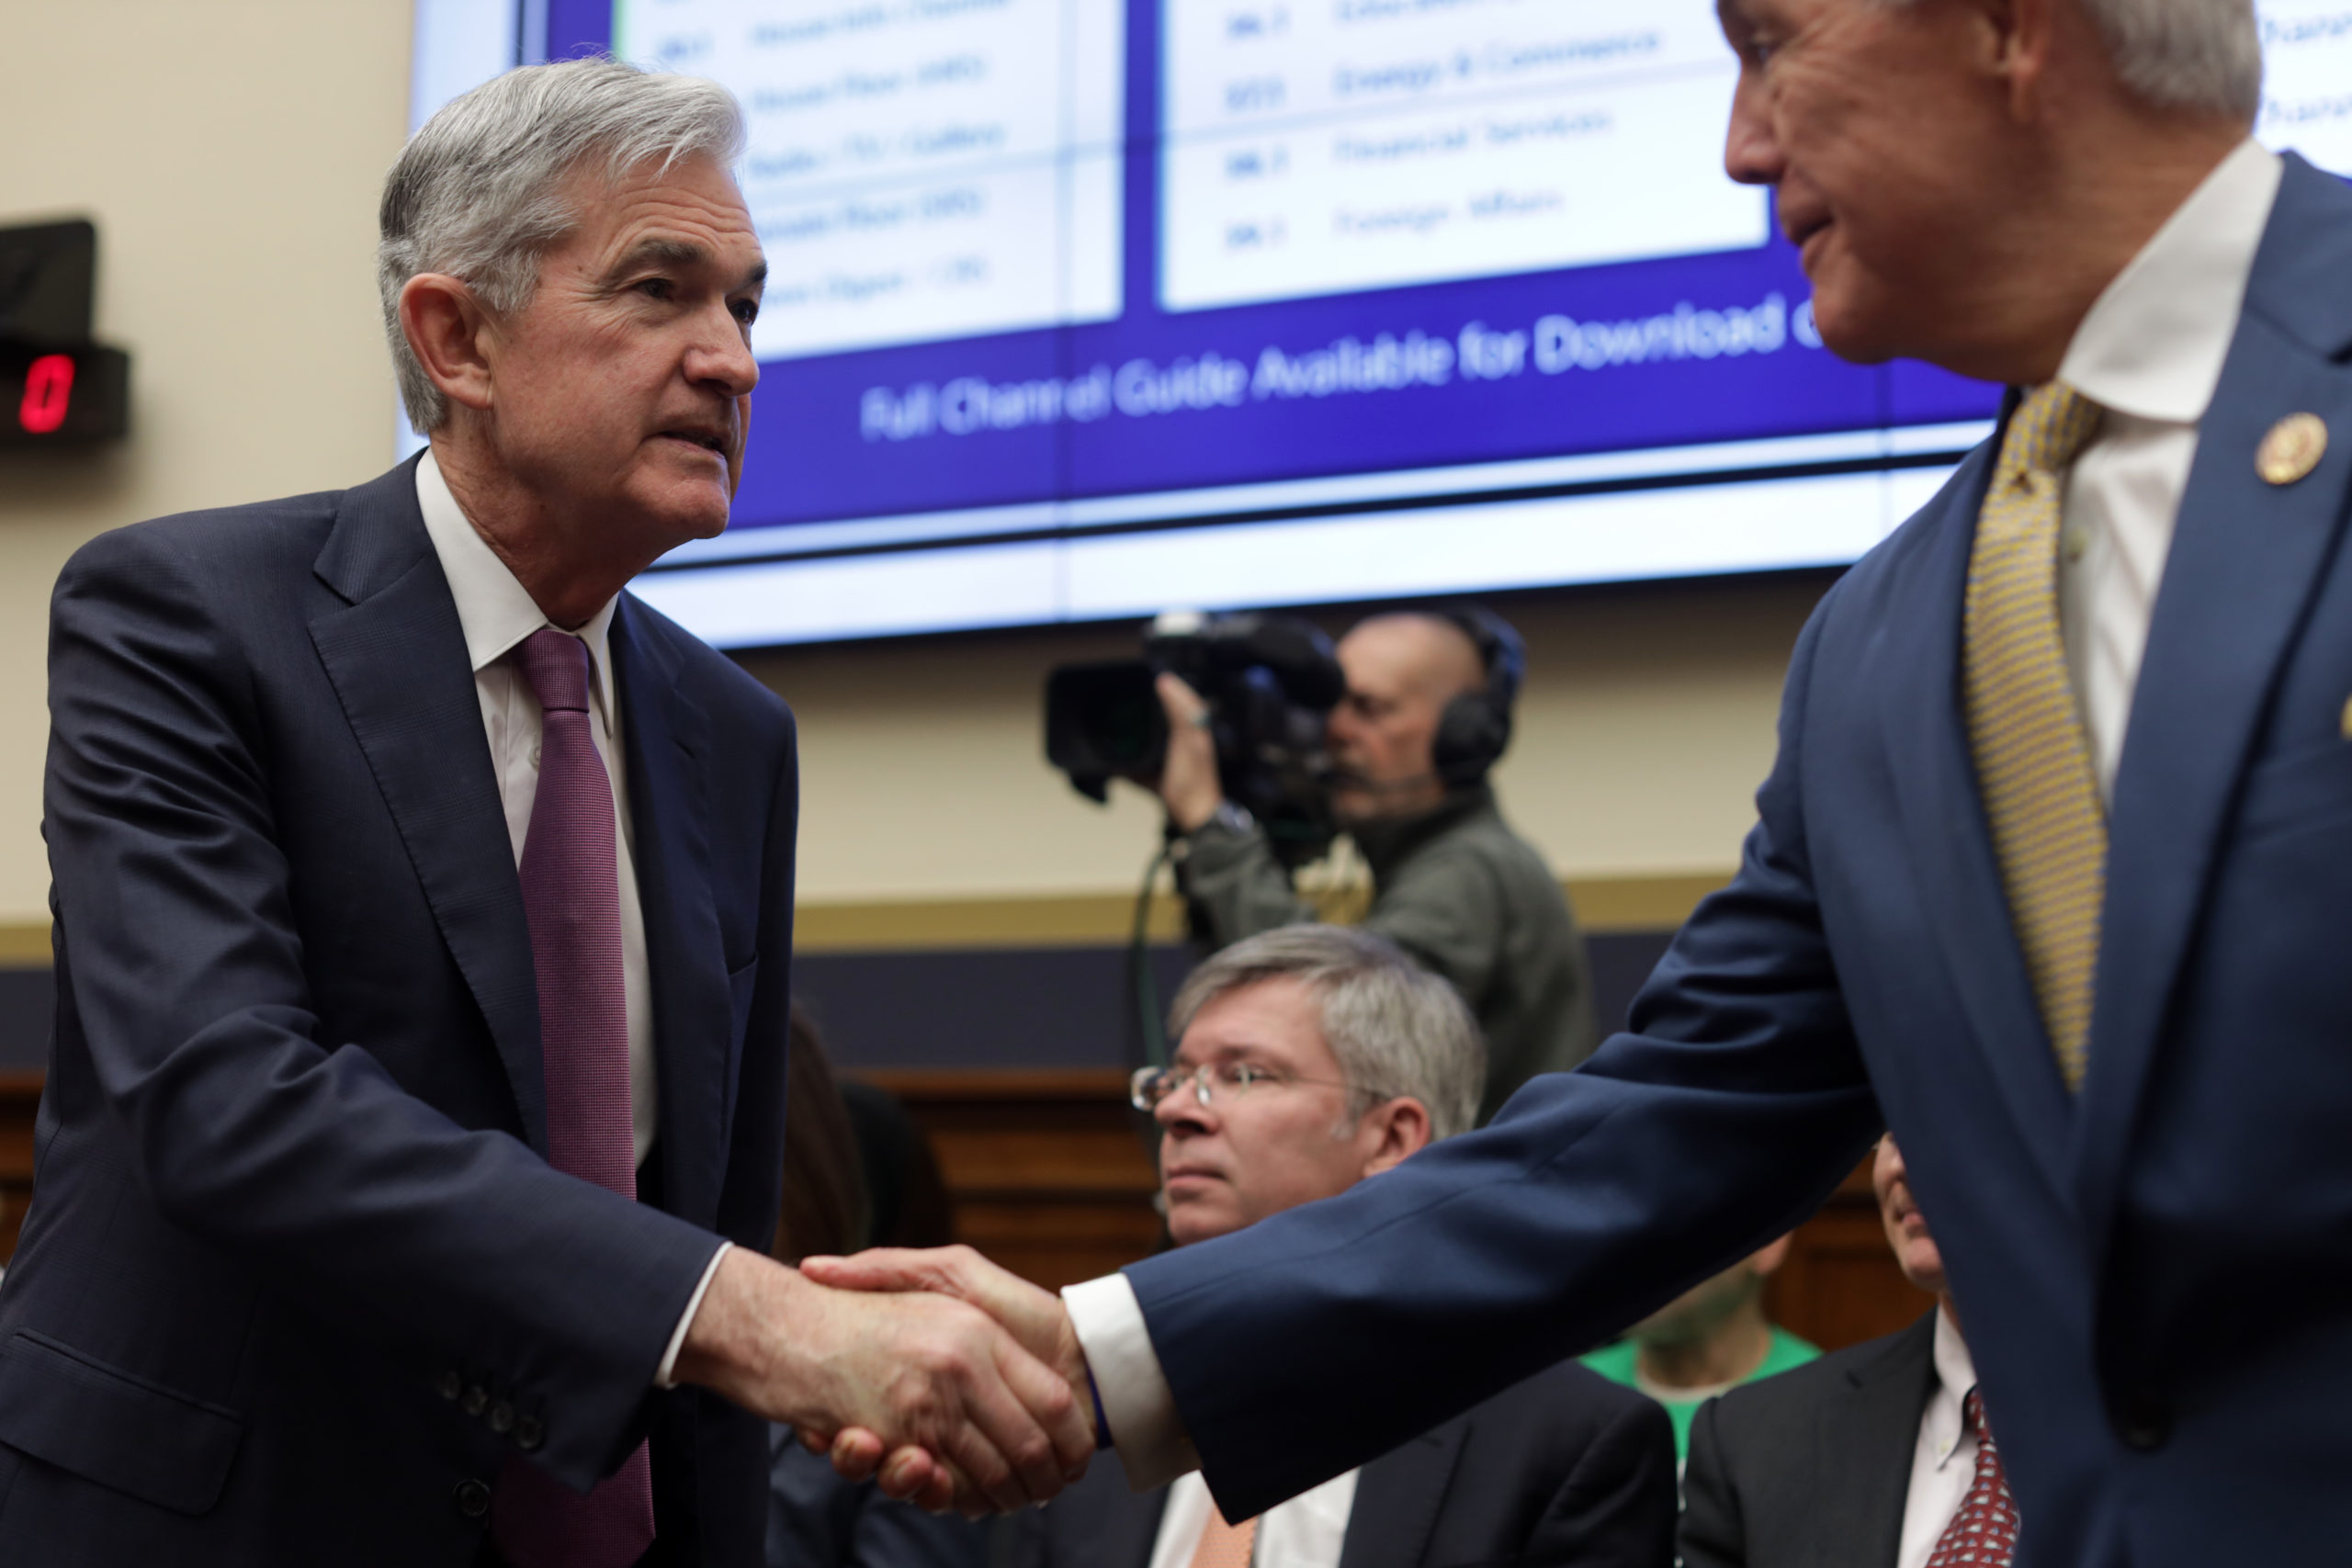 Federal Reserve Board Chairman Jerome Powell shakes hands with U.S. Rep. Roger Williams (R-TX) prior to a hearing before House Financial Services Committee February 11, 2020 on Capitol Hill in Washington, DC. The committee held a hearing on "Monetary Policy and the State of the Economy." (Photo by Alex Wong/Getty Images)